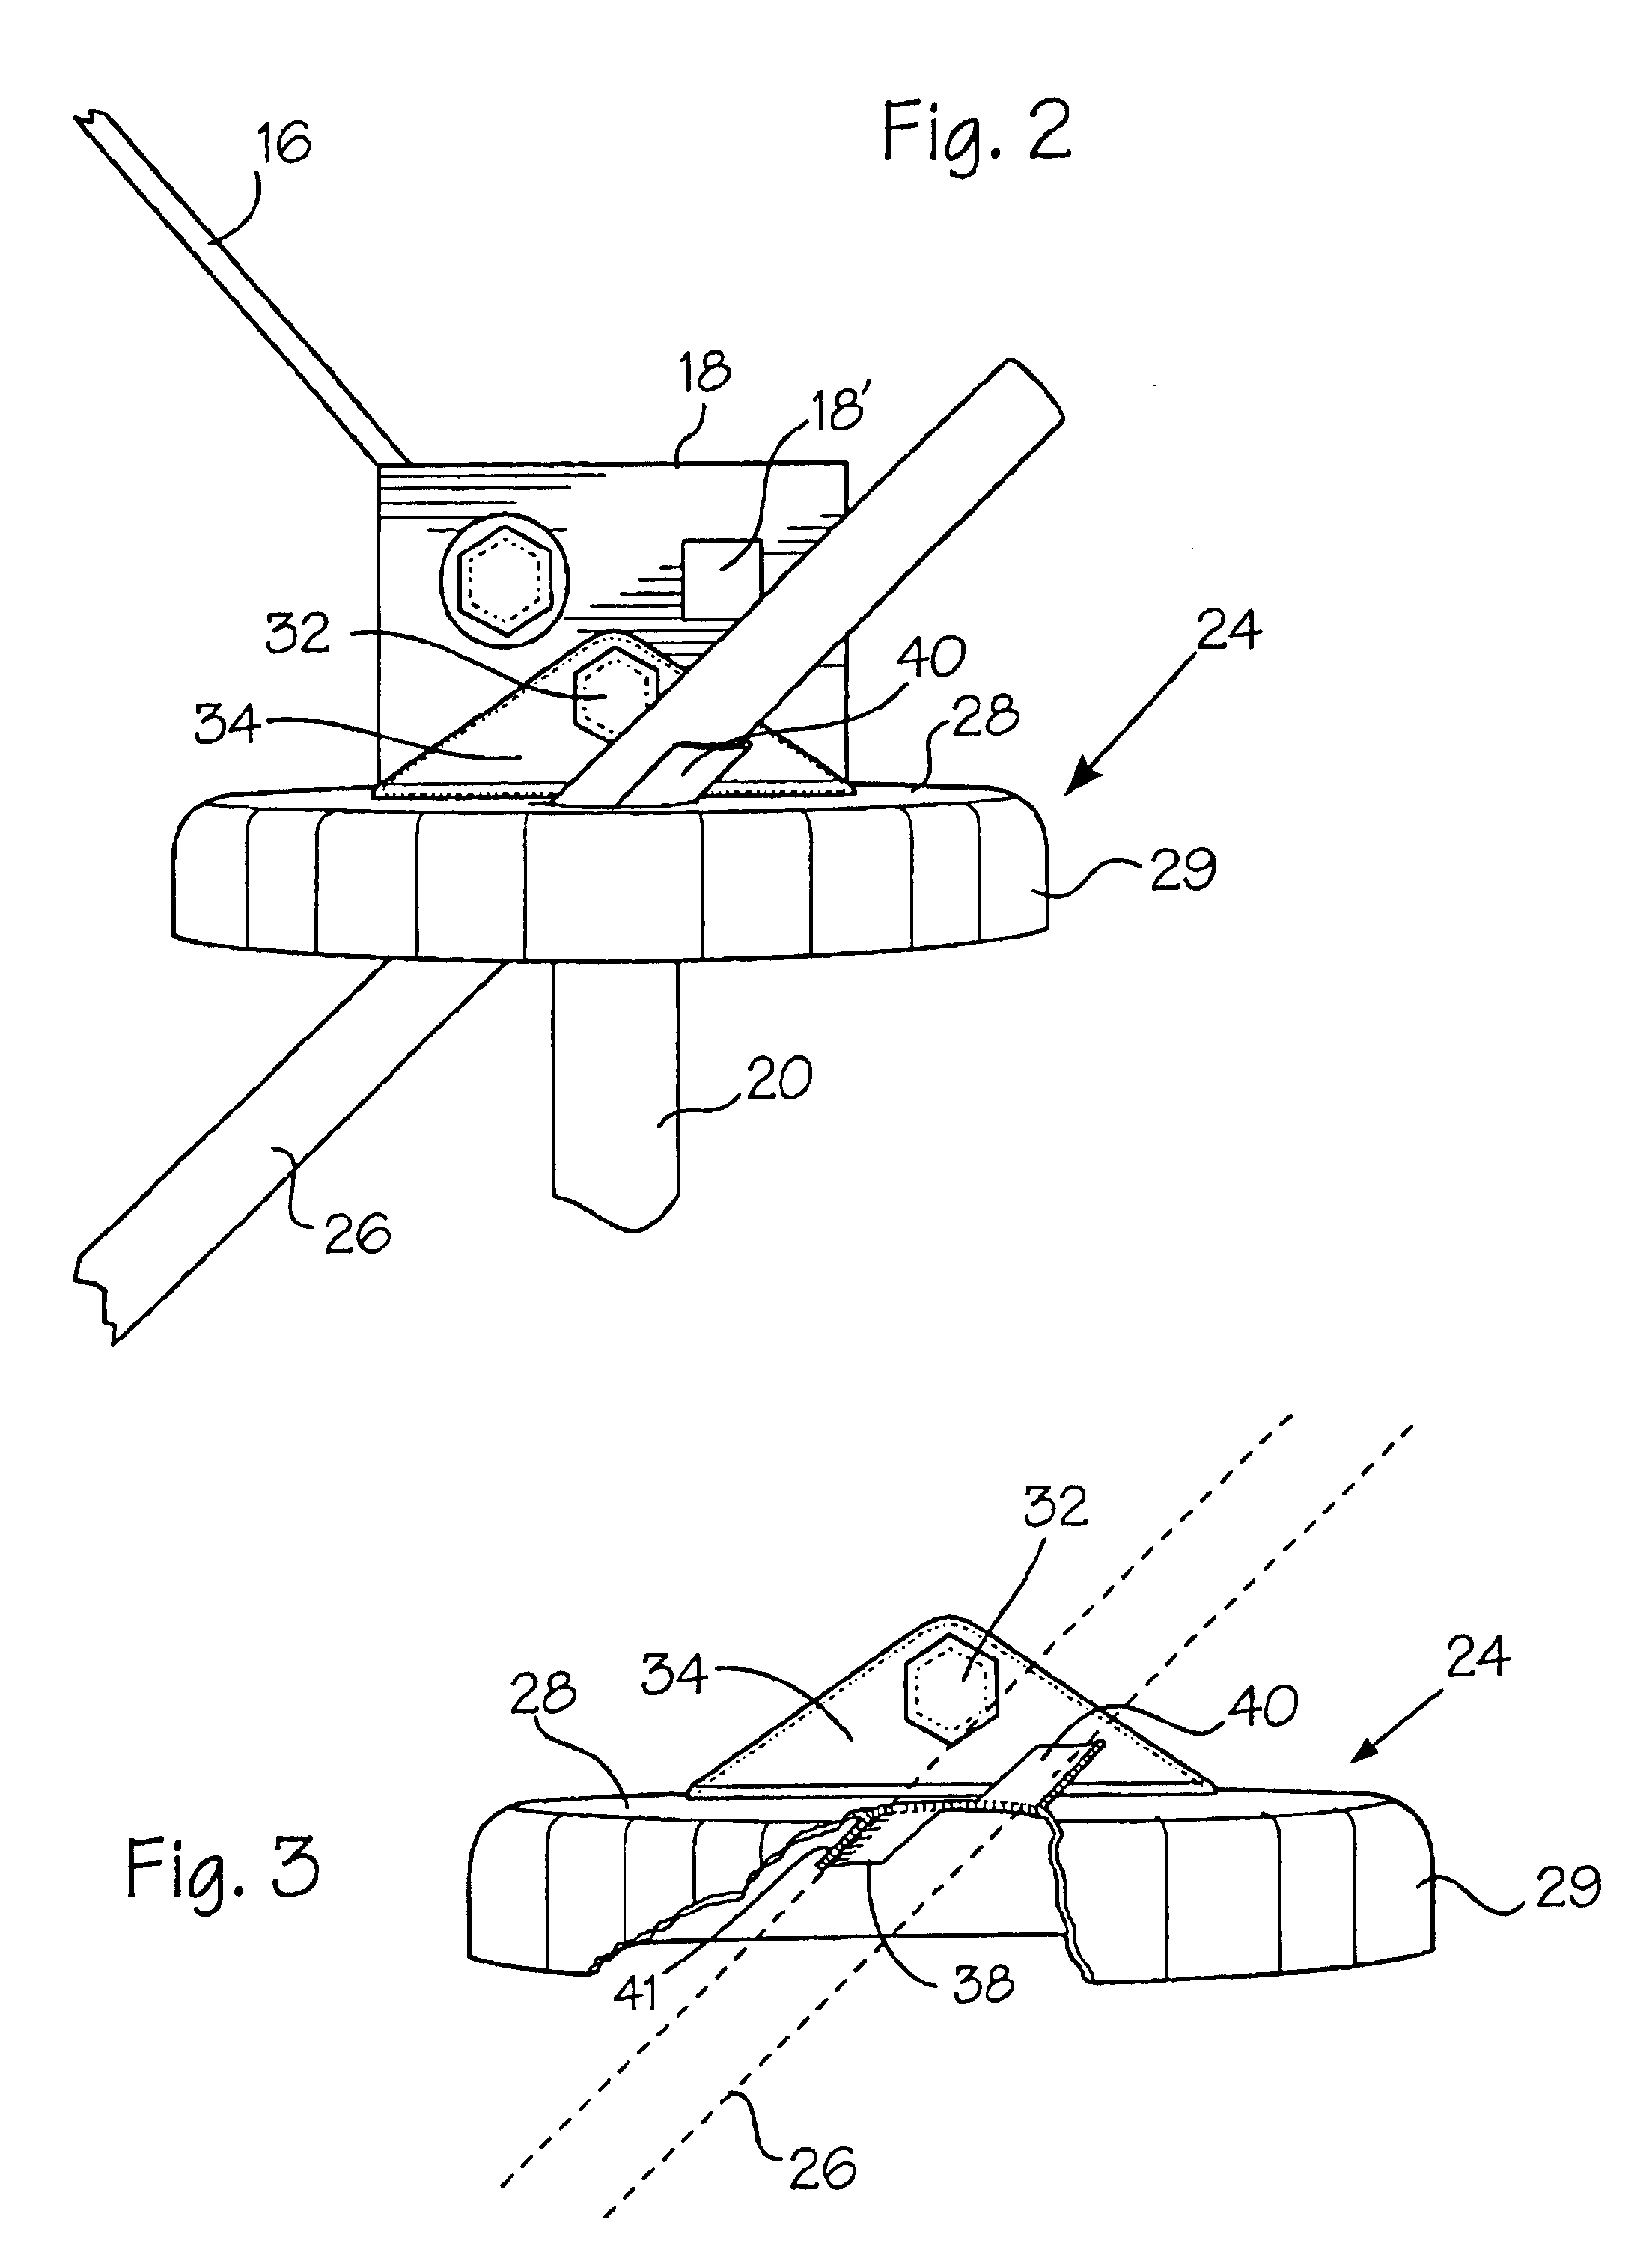 Drive/auger anchor and stabilizer